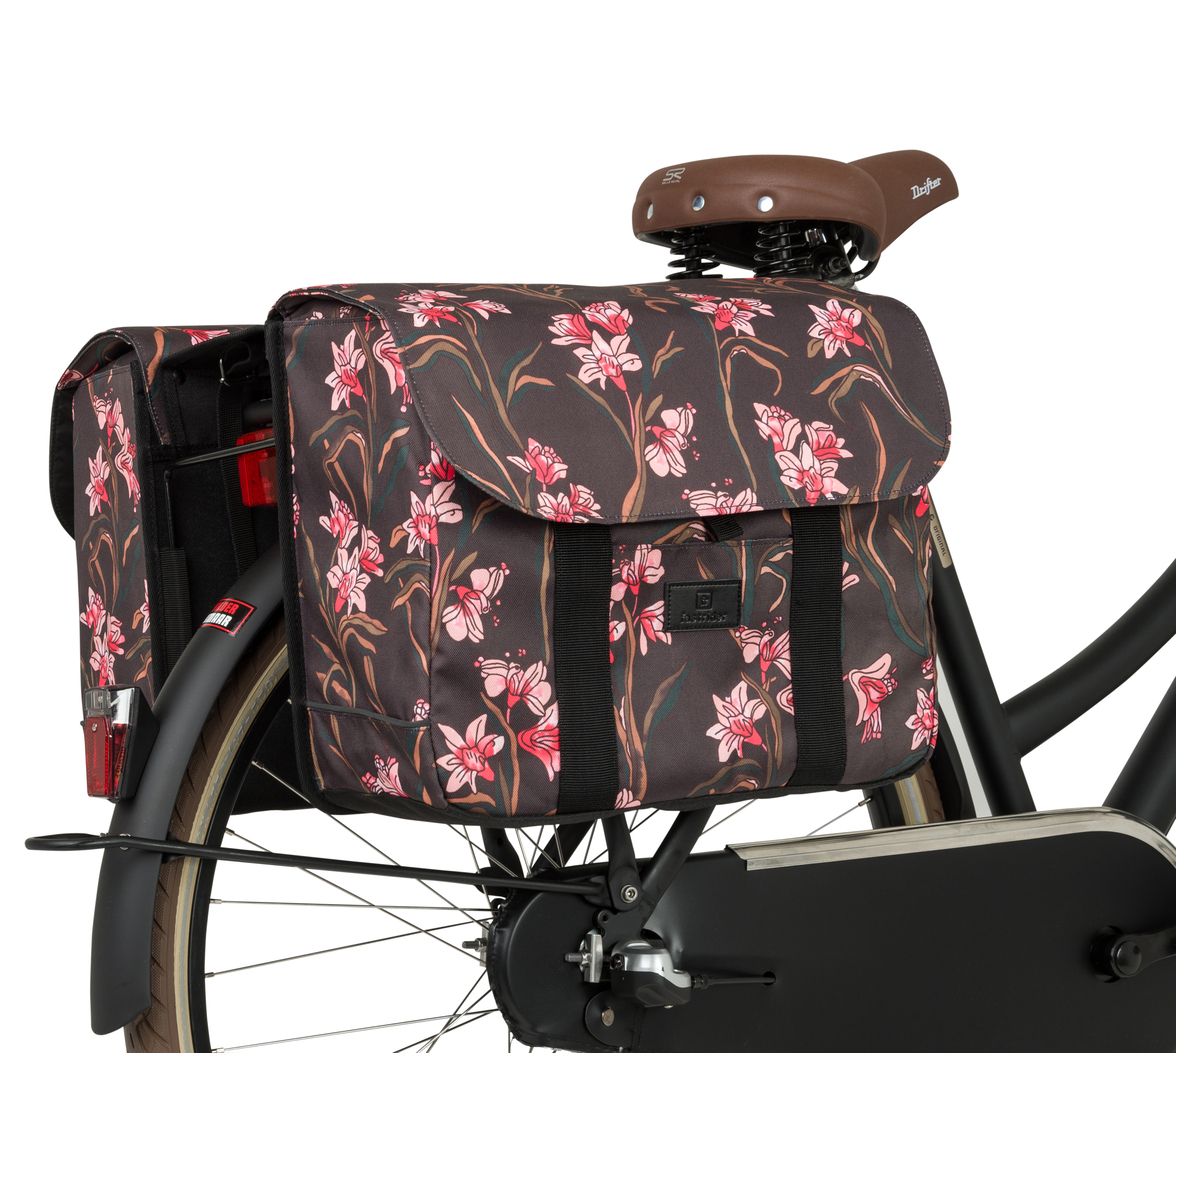 Fastrider Nyla Double Bike Bag Trend fit example